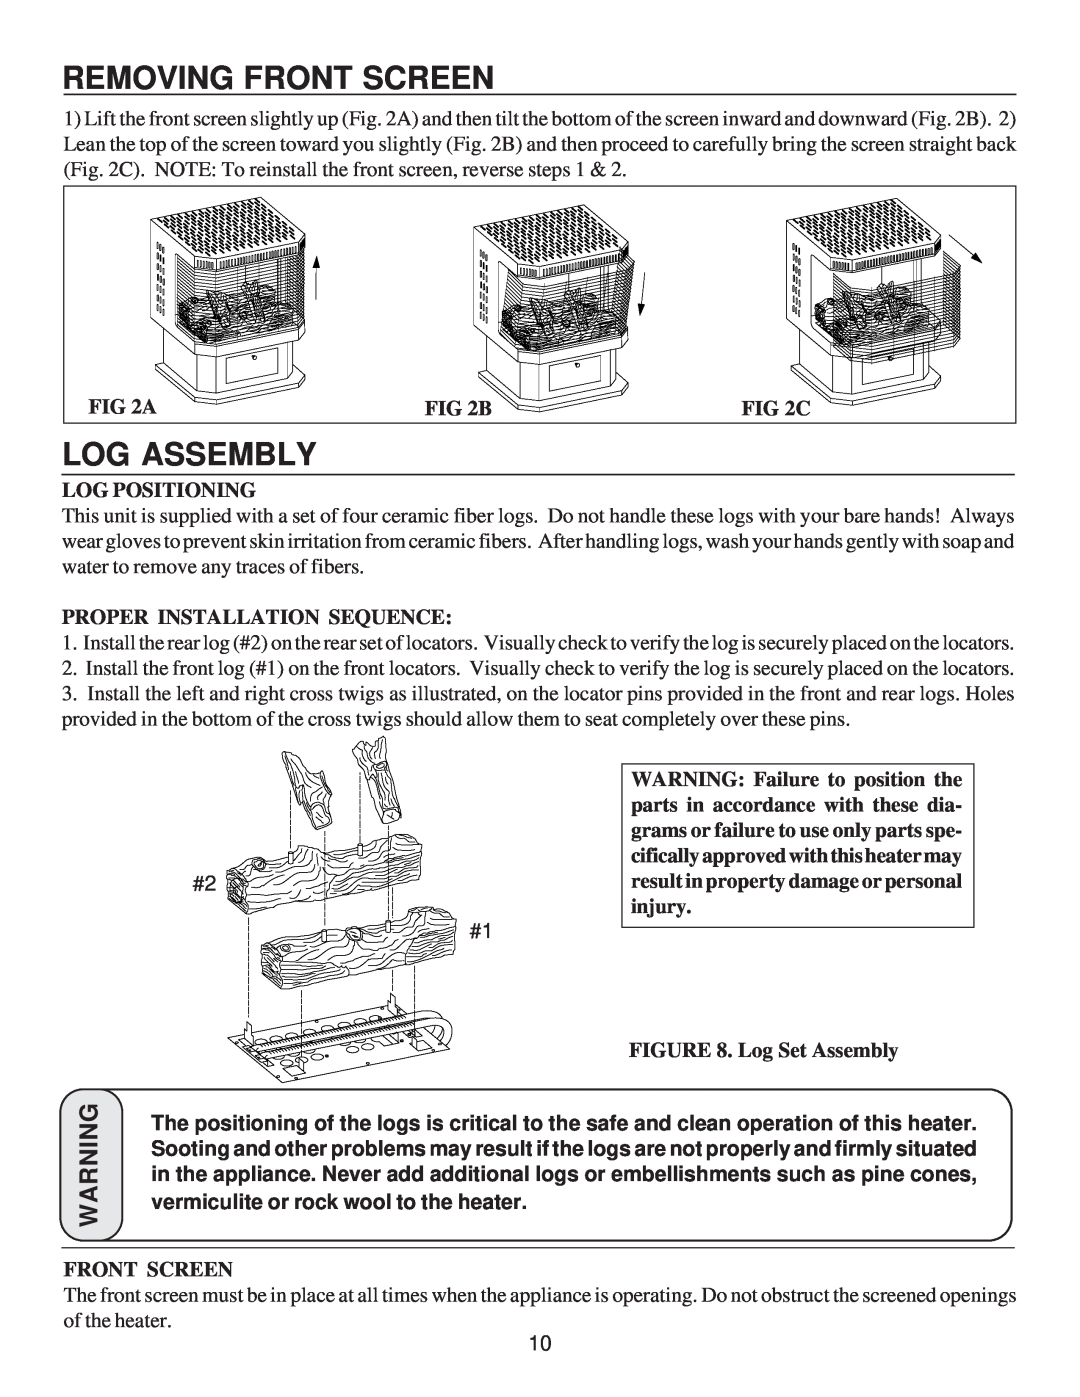 United States Stove A9740L manual Removing Front Screen, Log Assembly, B, C, Log Positioning, Proper Installation Sequence 